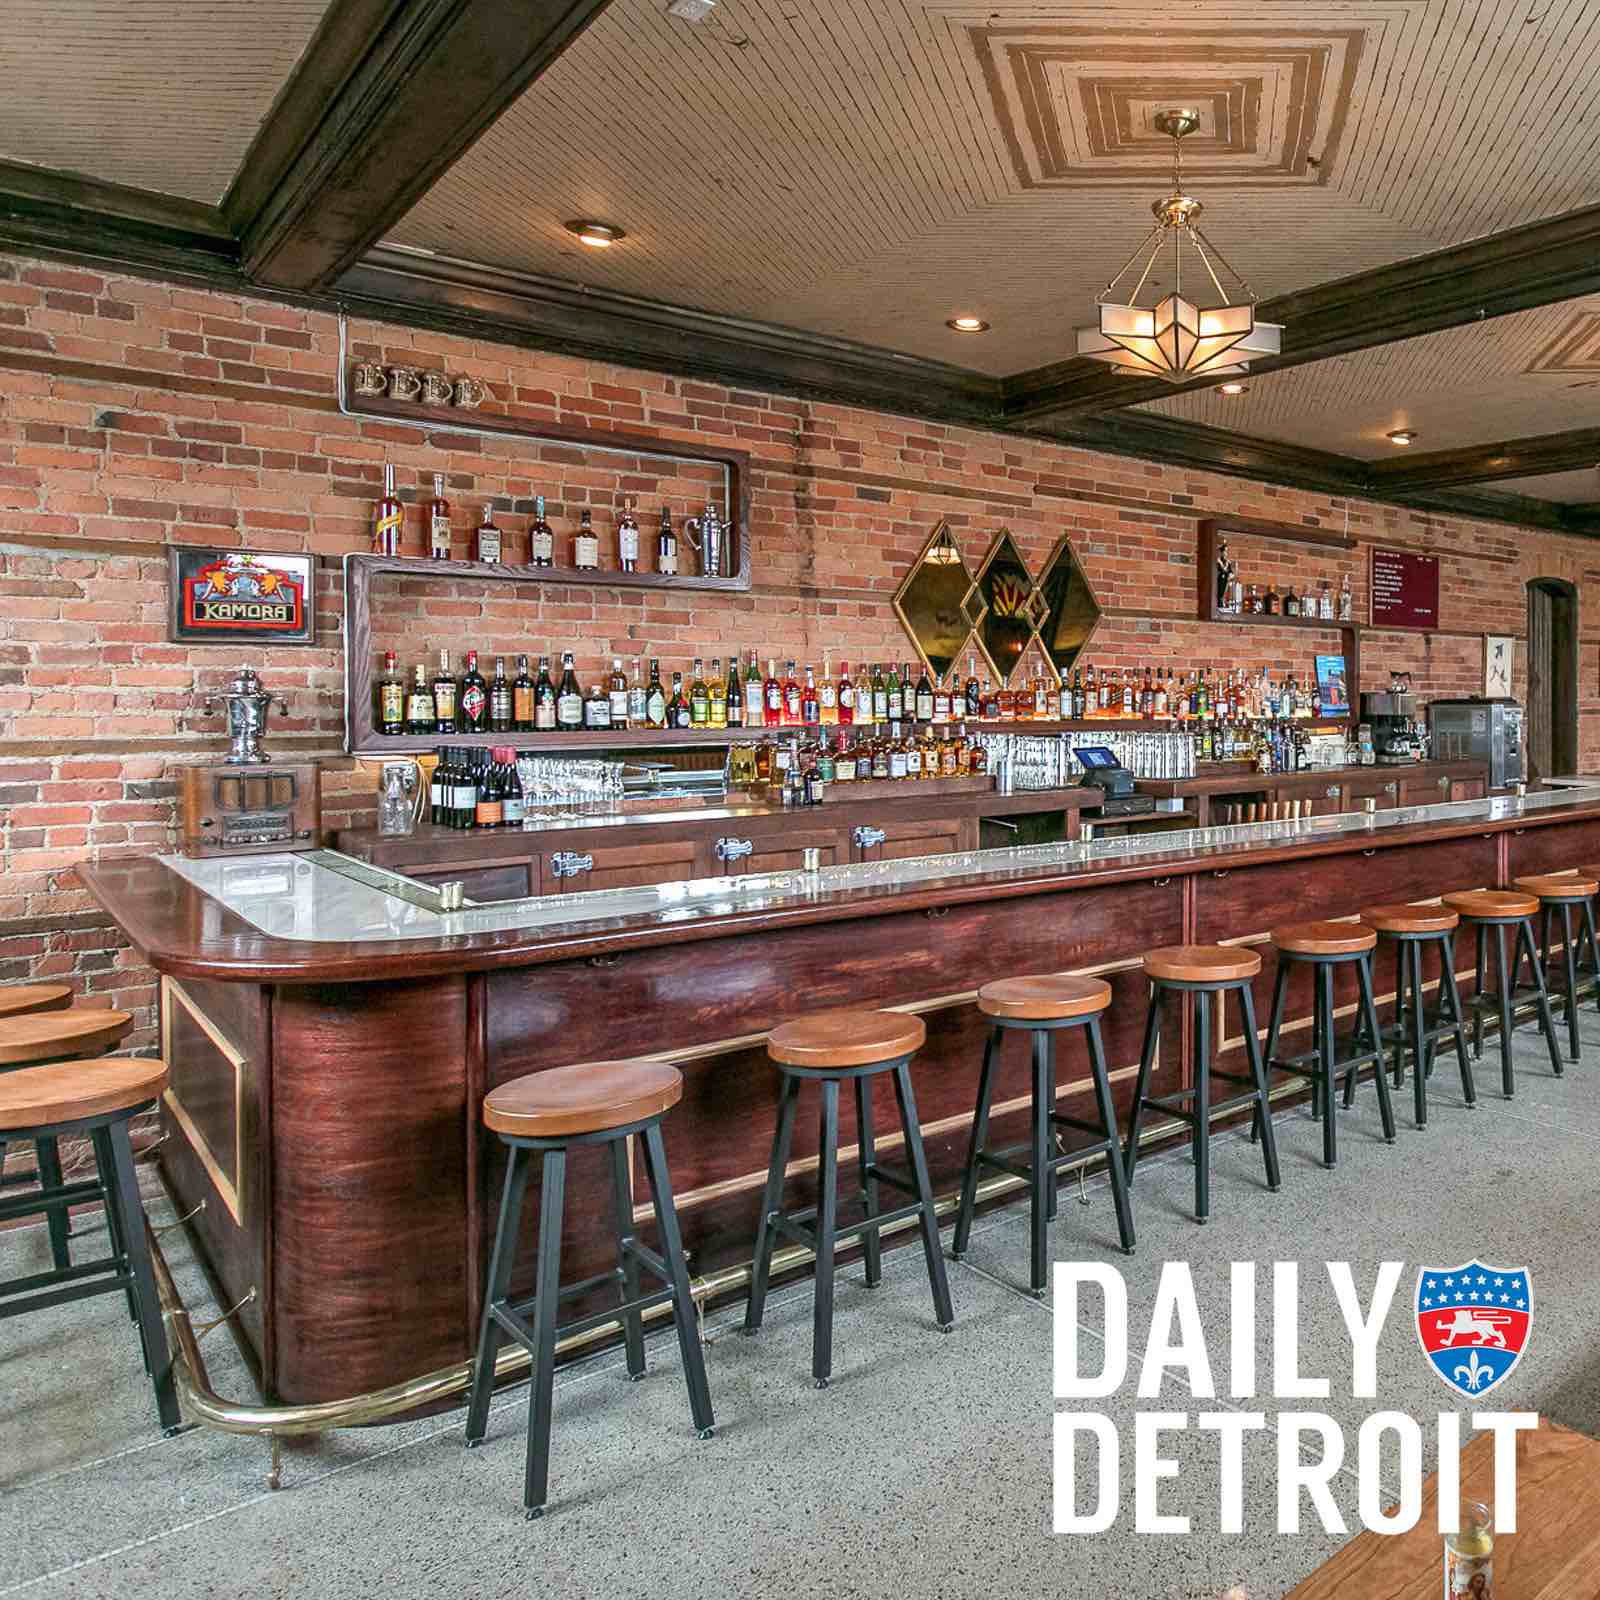 From 1890s General store to one of Detroit's best bars: Inside Kiesling